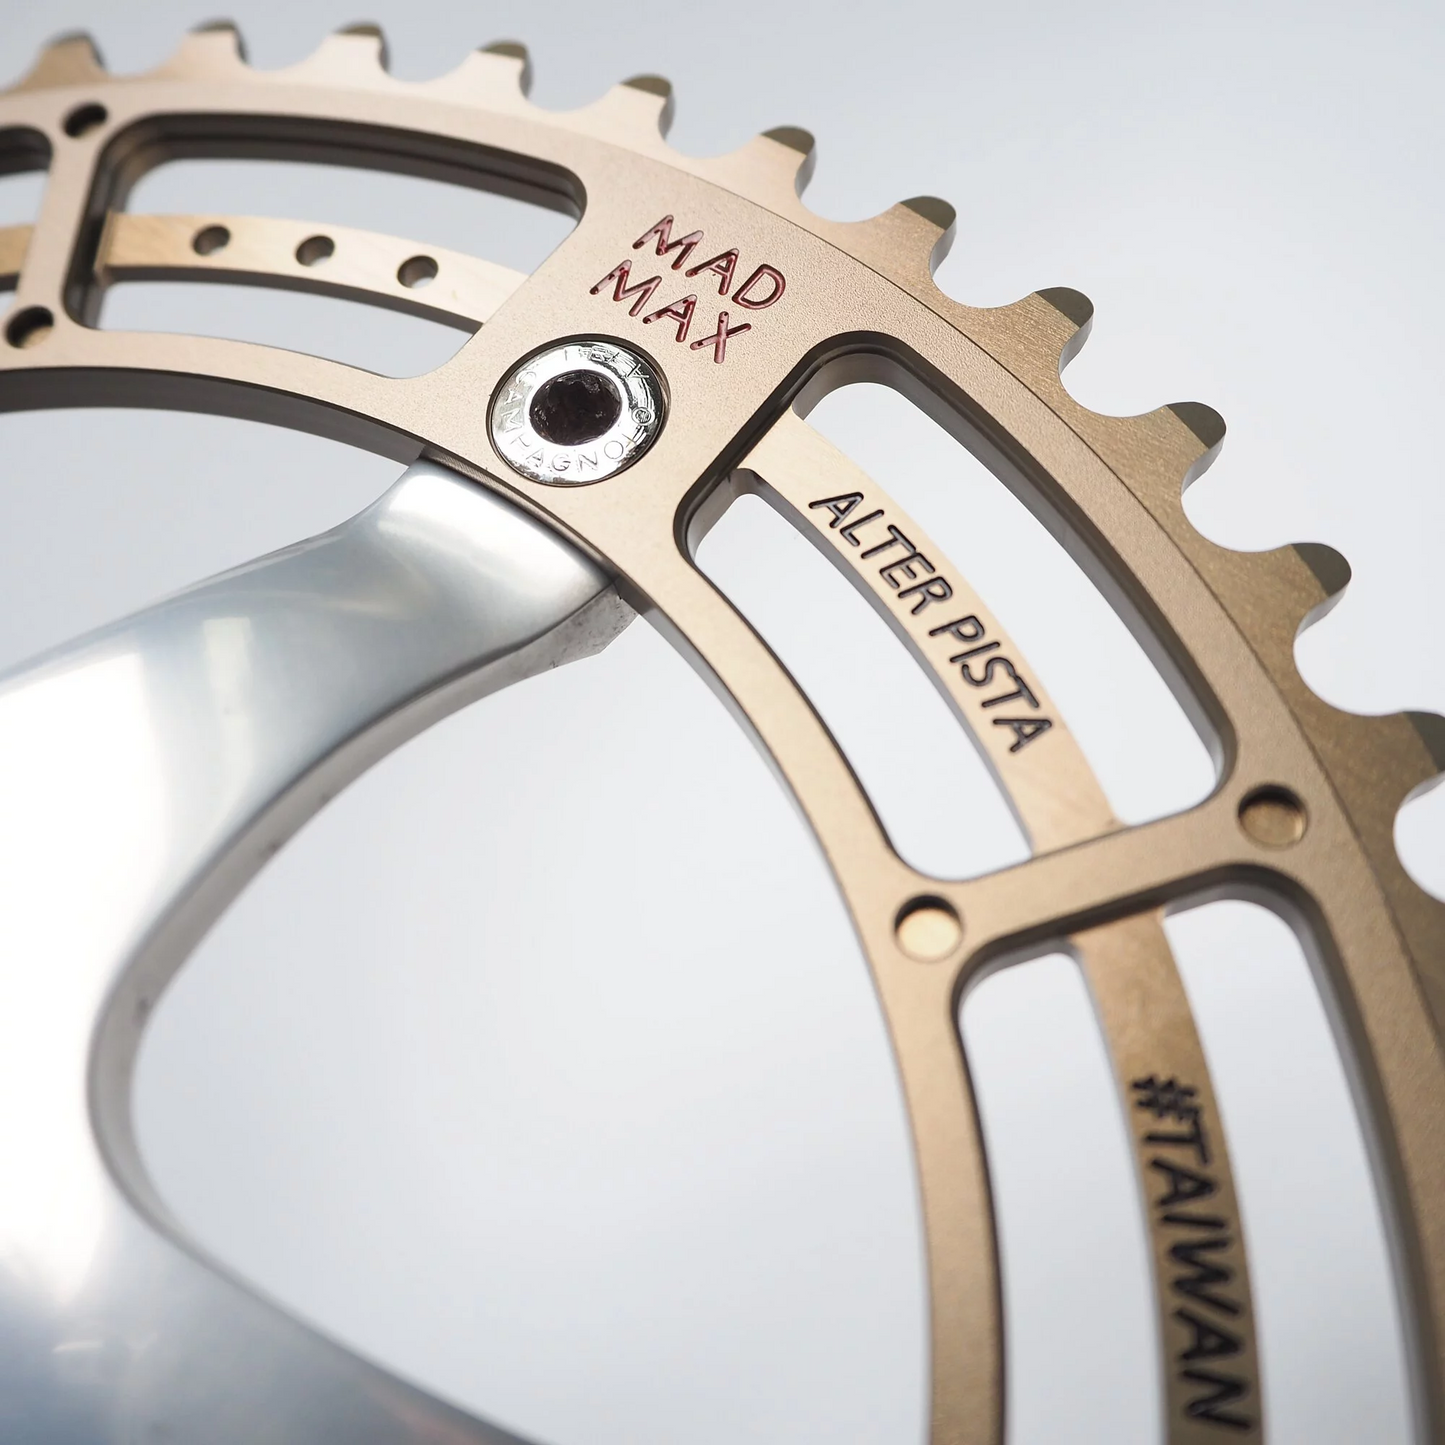 Alter Cycles Mad Max Chainring MM49HA - Bronze 49T